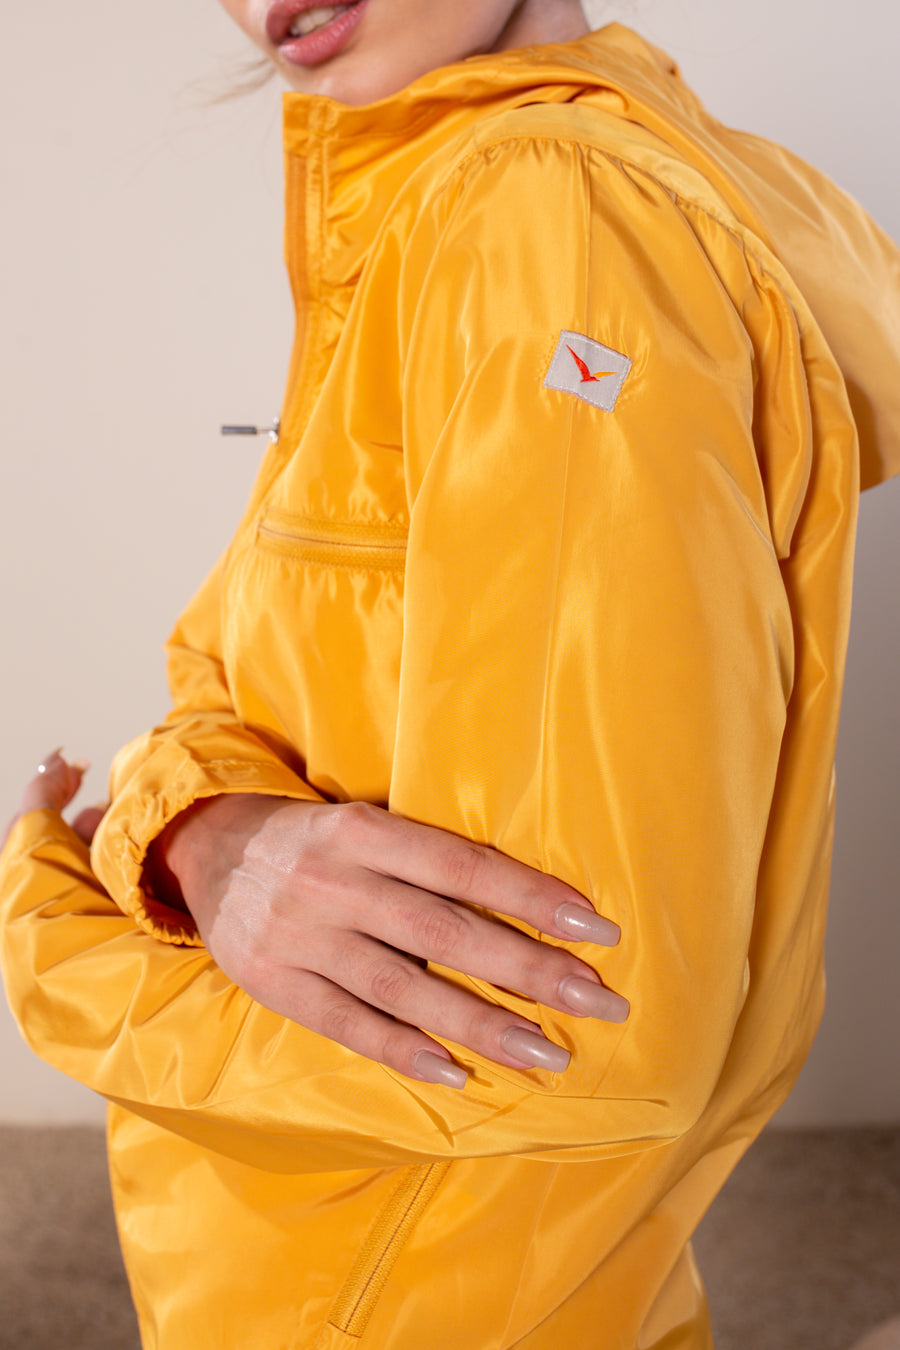 Women's Windansea Jacket in Golden | VOLO Apparel | The ultimate all year jacket, an ultralight hooded windbreaker, crafted with the revolutionary memory fabric and five pockets. This jacket is full of features, water repellant, three zipper pockets, UPF 50 protection from the sun and tailored fit to look super stylish while being ready for any adventure.